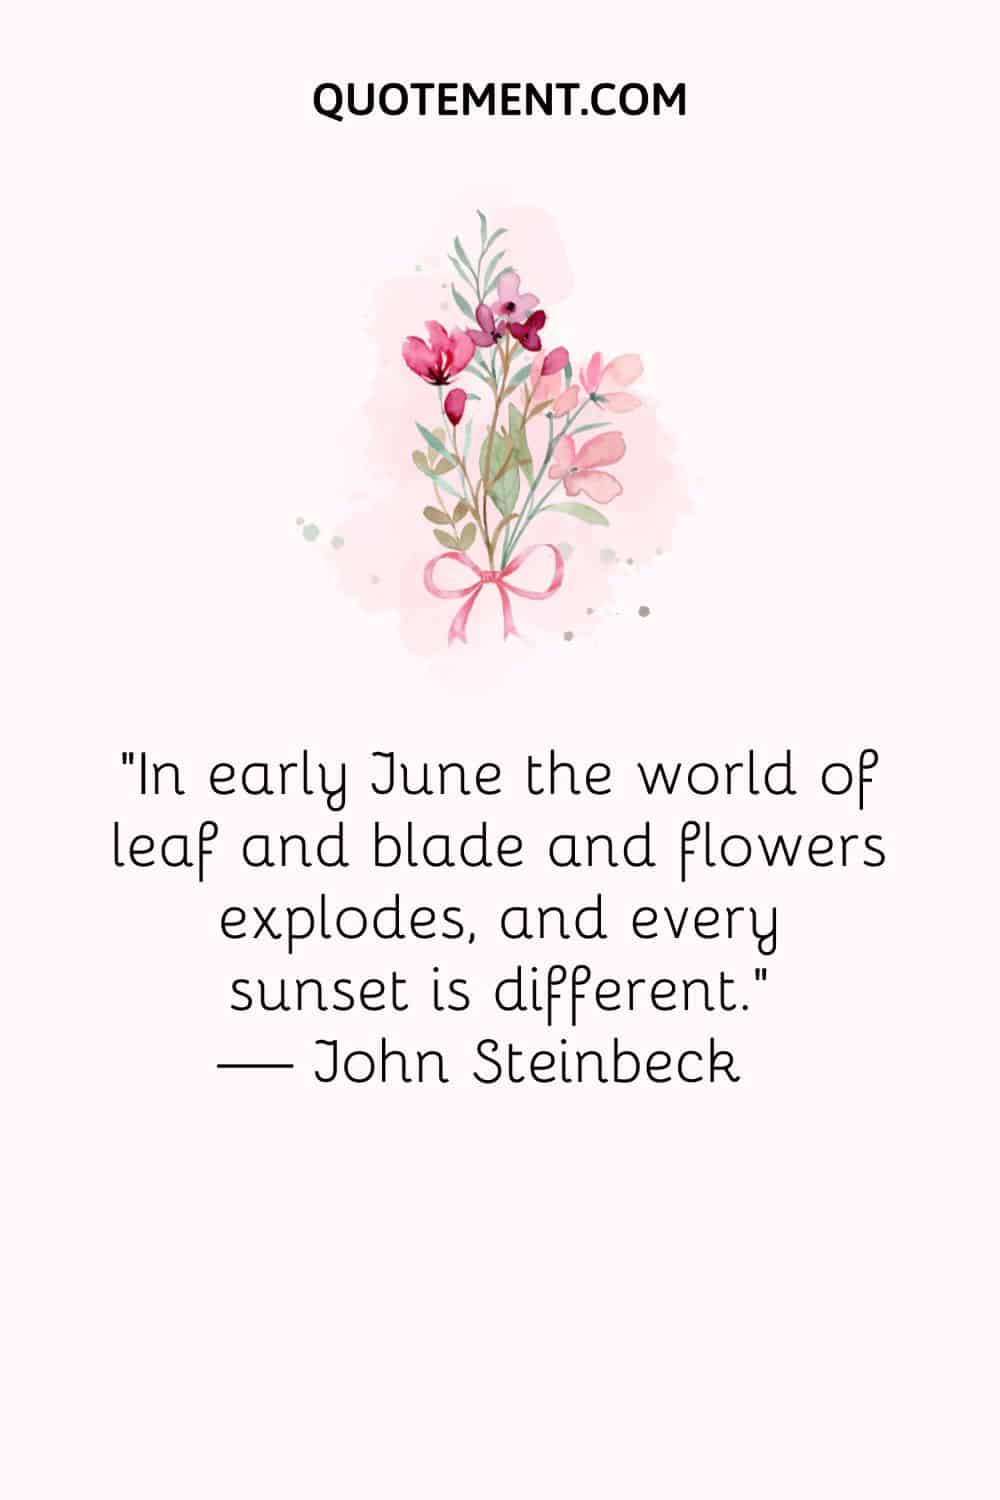 pink flowers image representing the best June quote